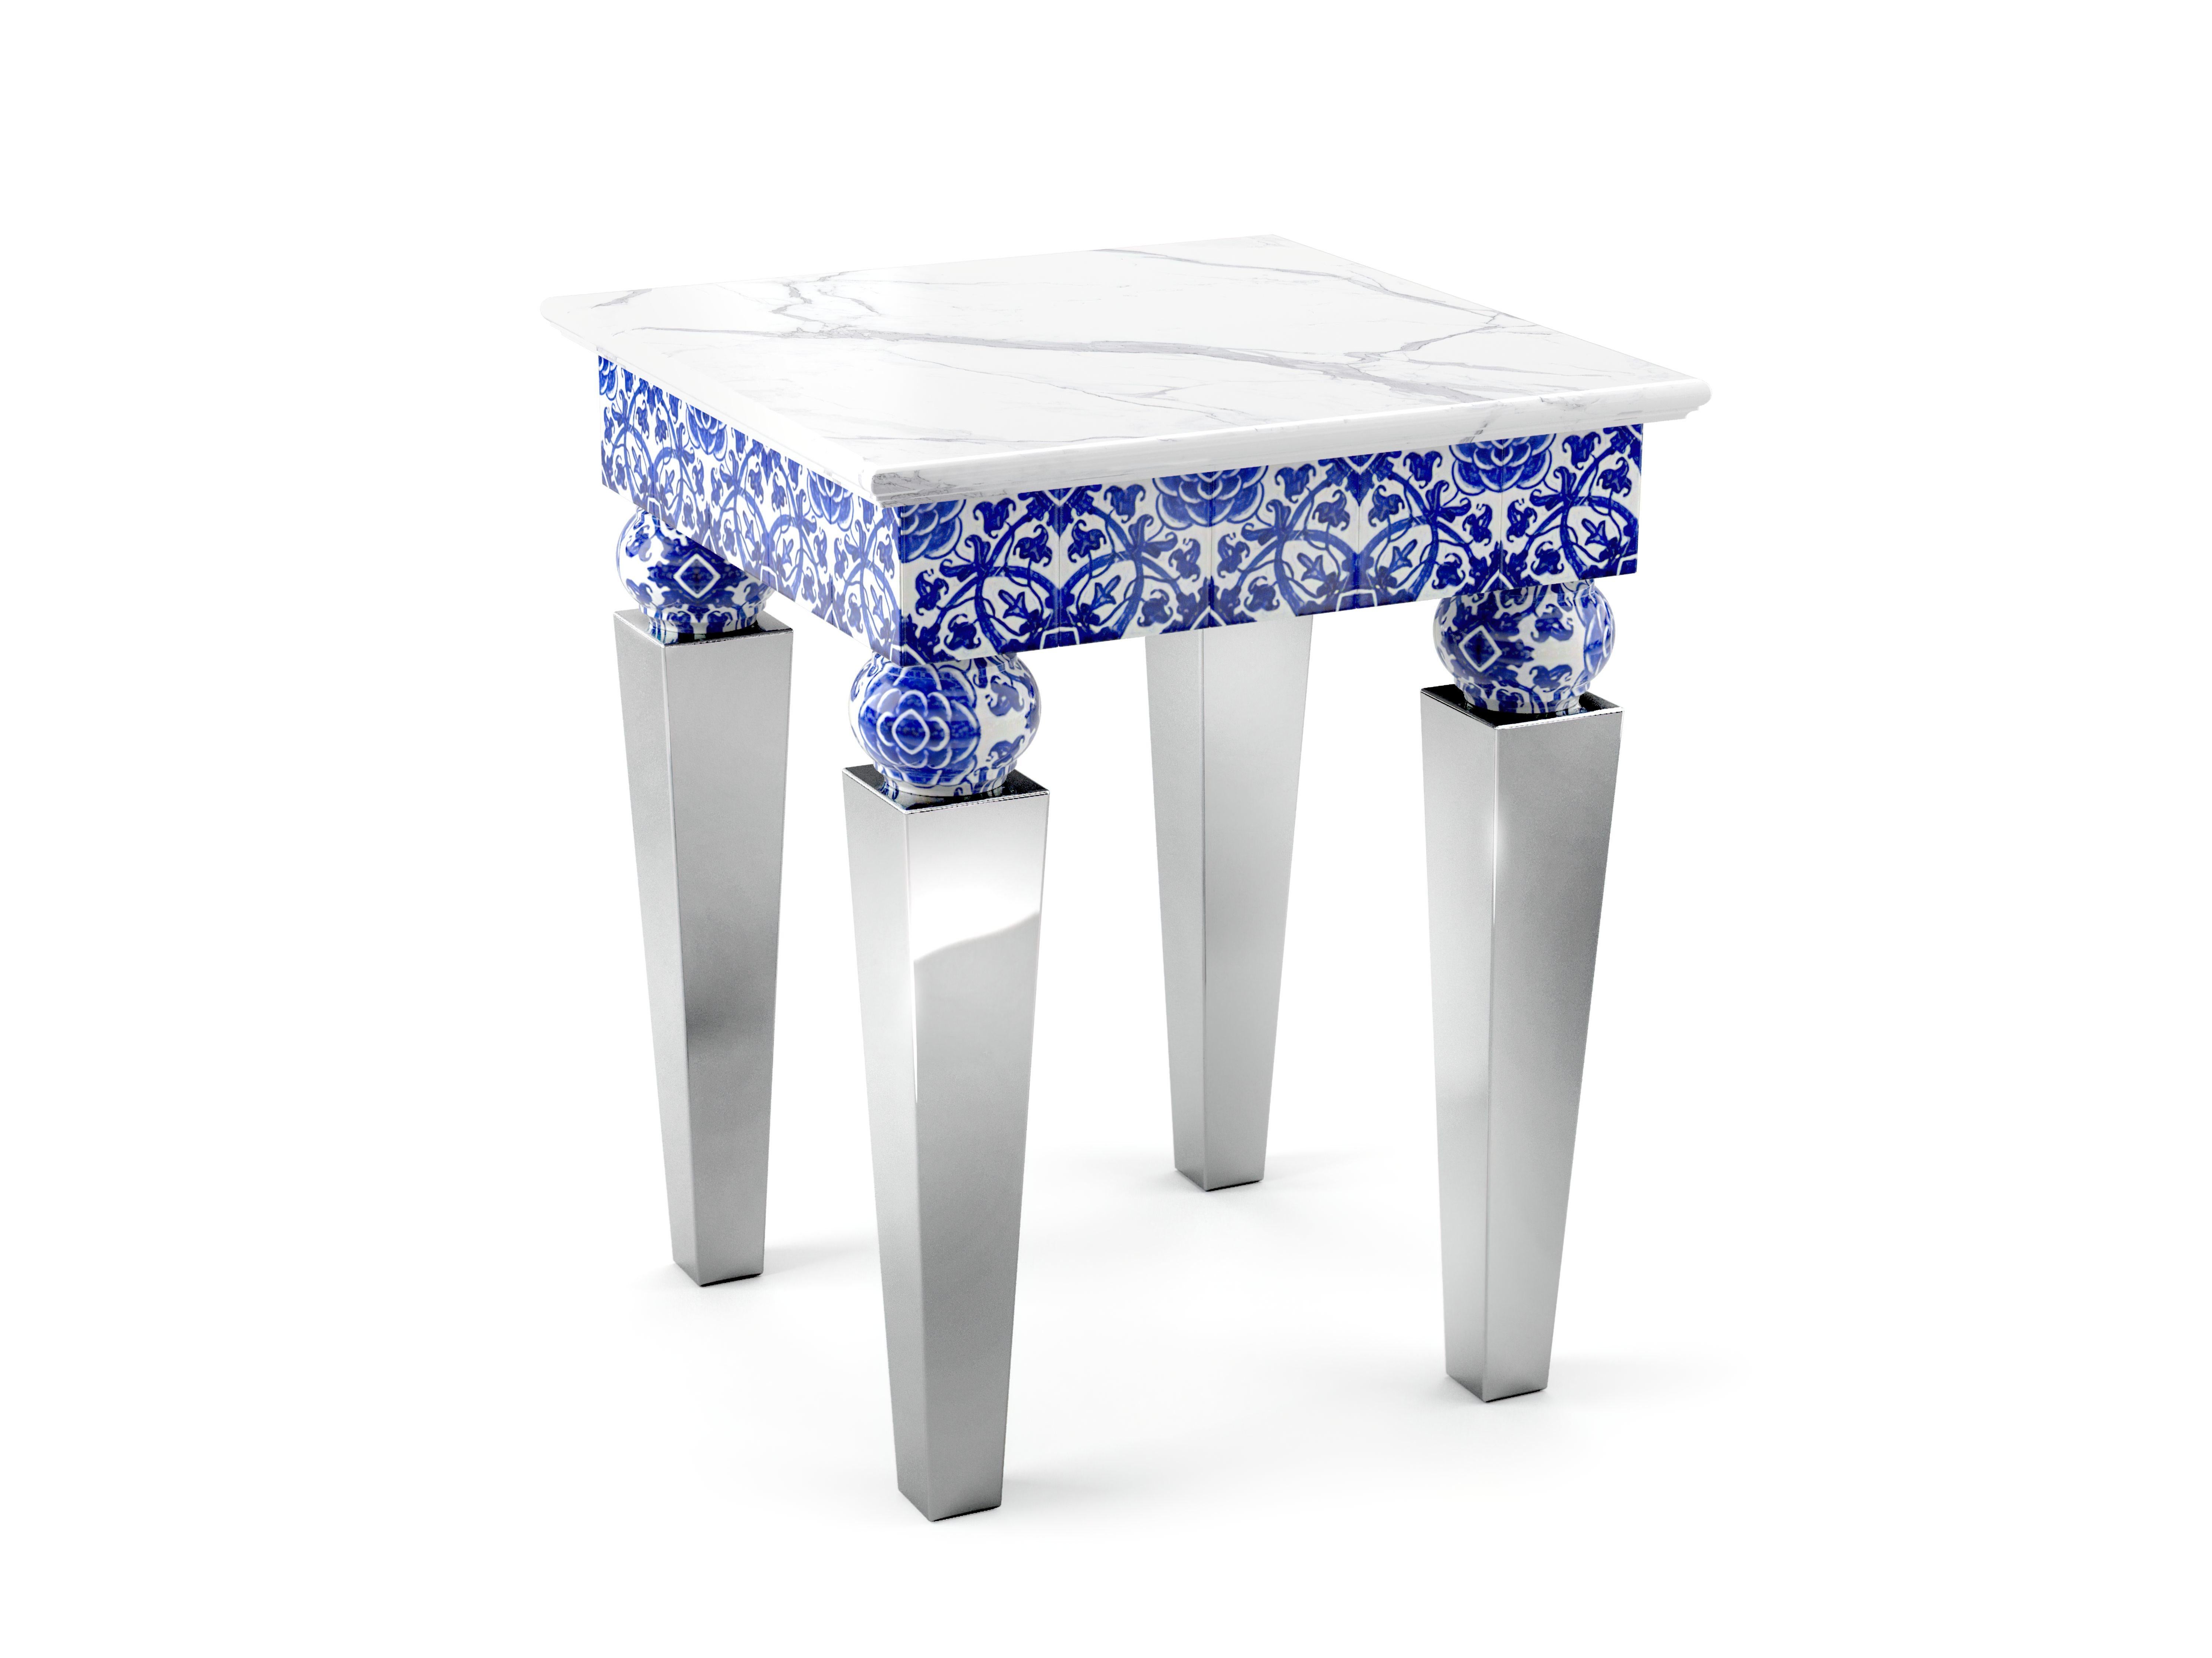 Side Table White Marble Top Mirror Steel Legs, Blue Majolica Tiles Also Outdoor In New Condition For Sale In Recanati, IT